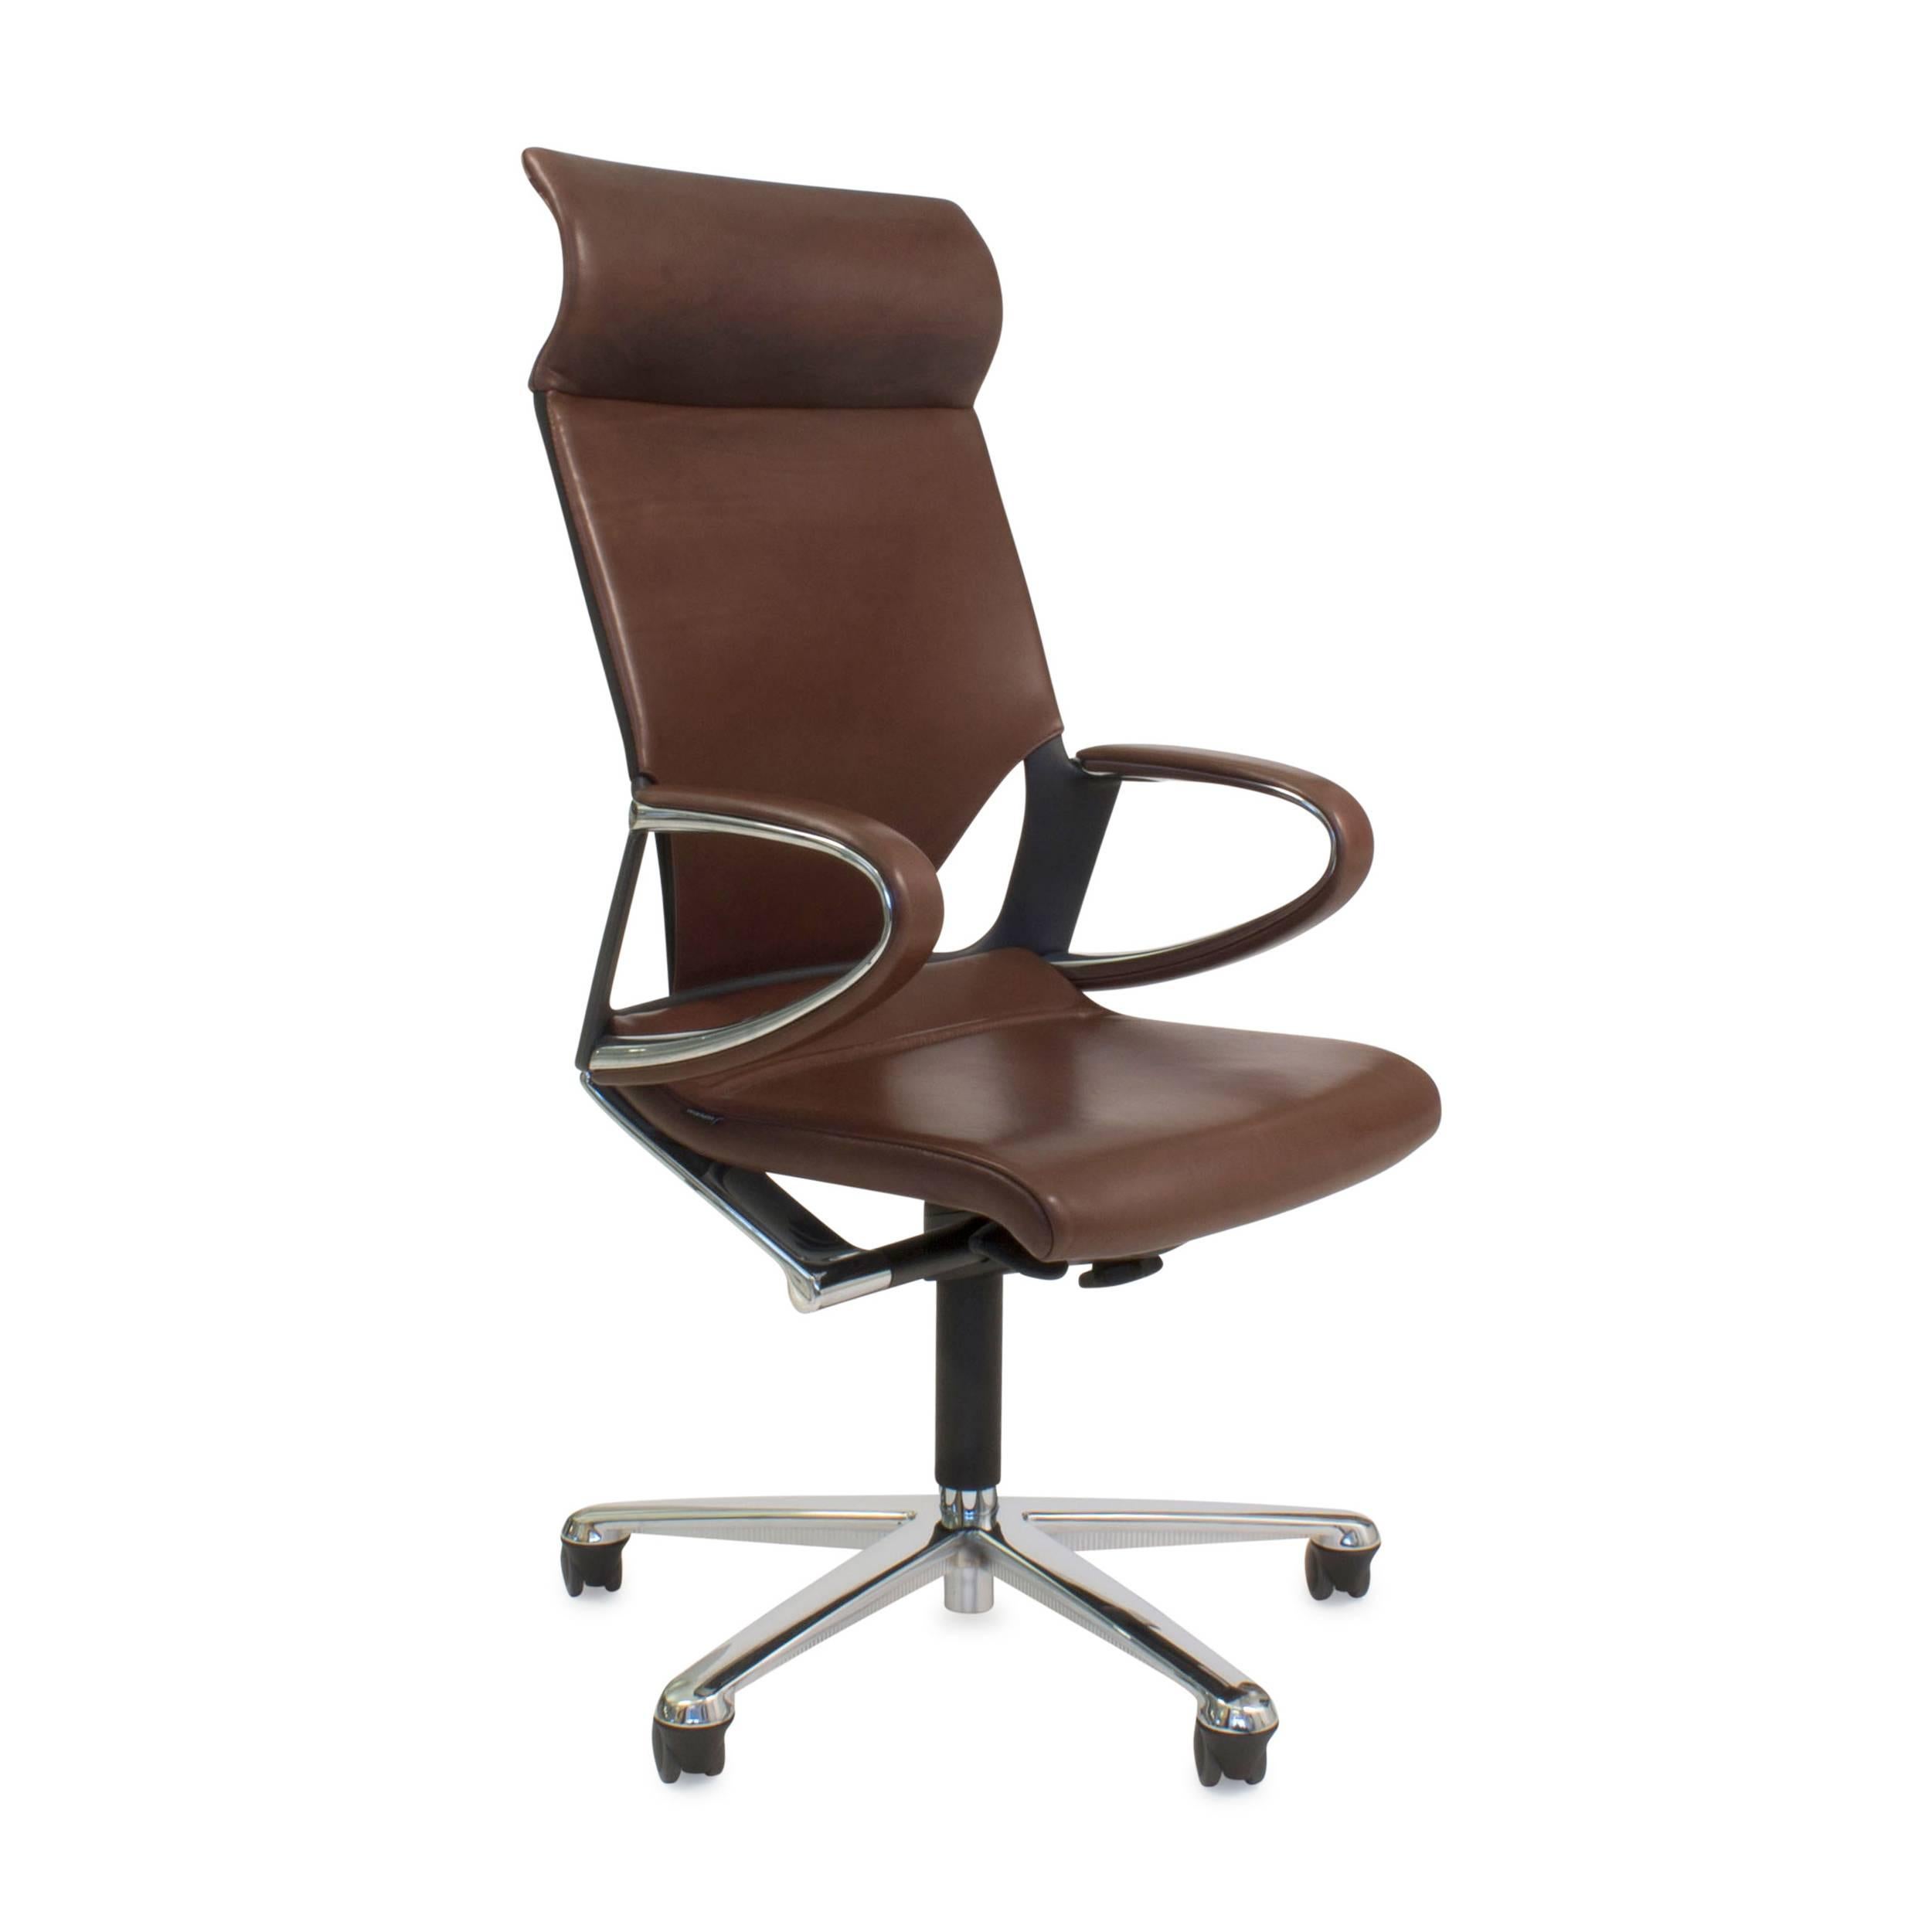 In positions of responsibility, office and conference chairs are the last things you cut back on. Which is why the Modus Executive range is all about quality not quantity. It combines the exceptional comfort and stylish appearance of Modus with